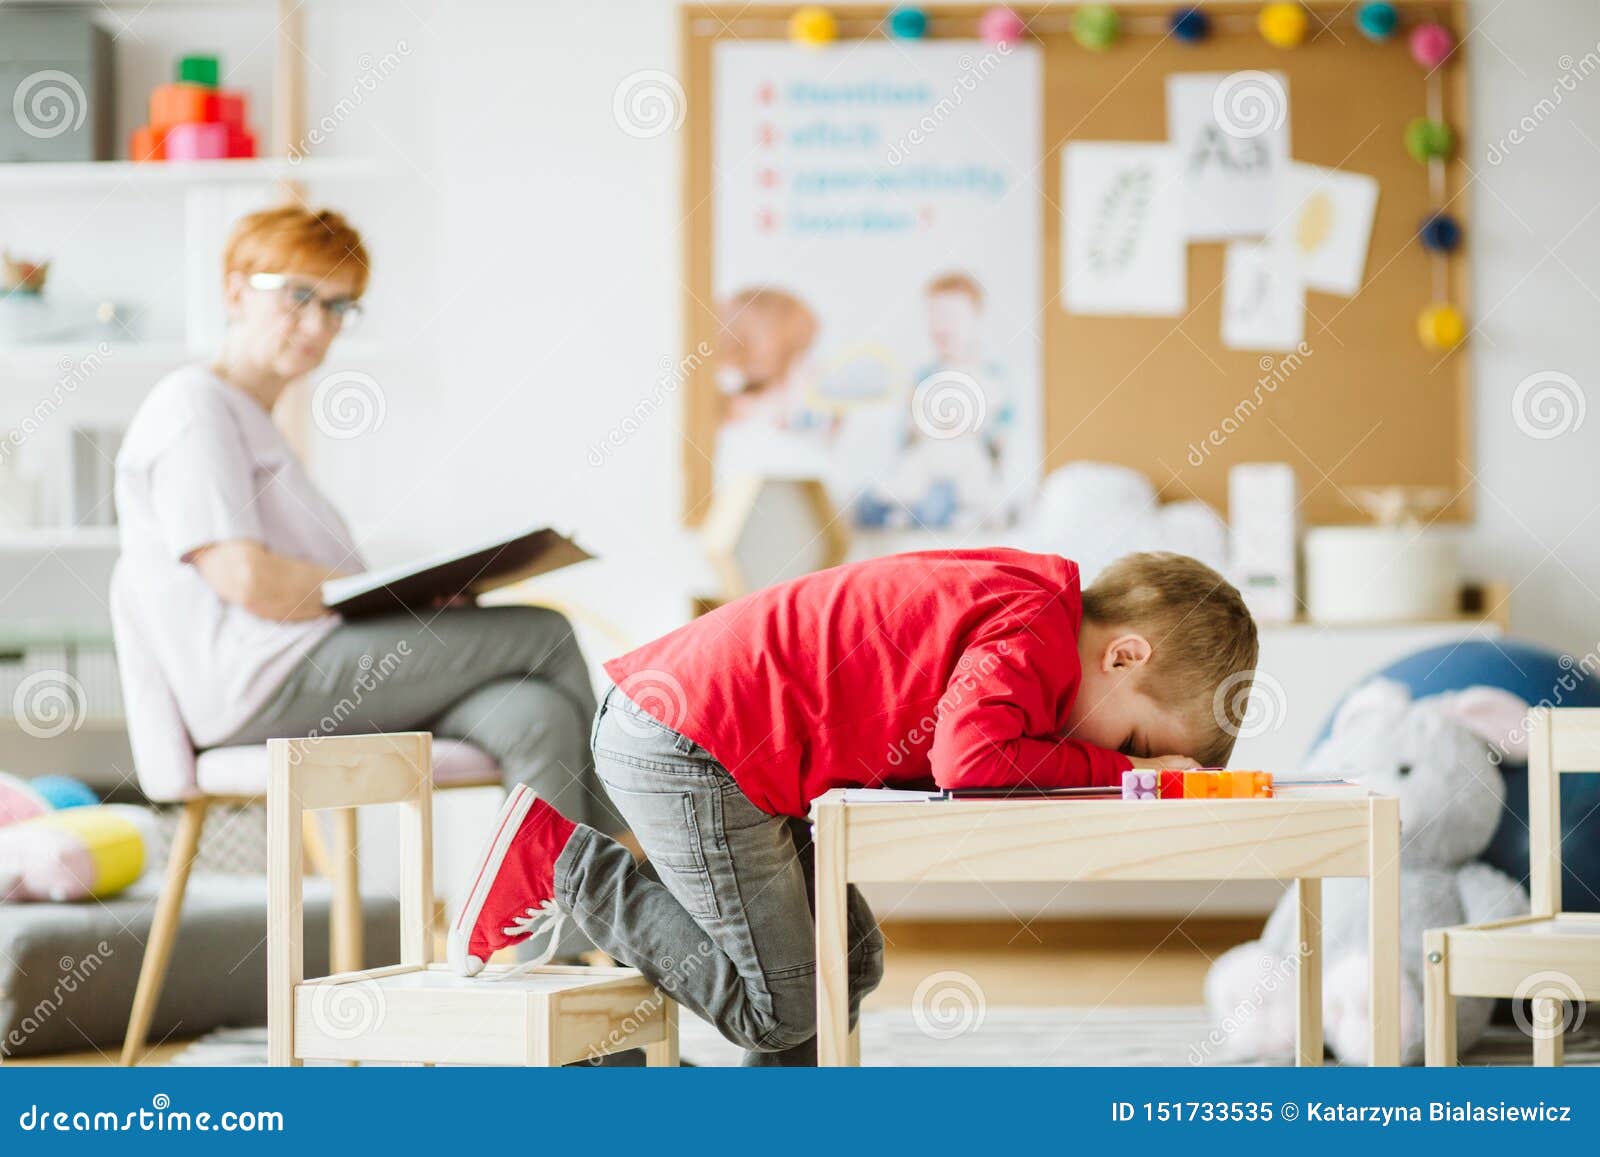 cute little boy with adhd during session with professional therapist